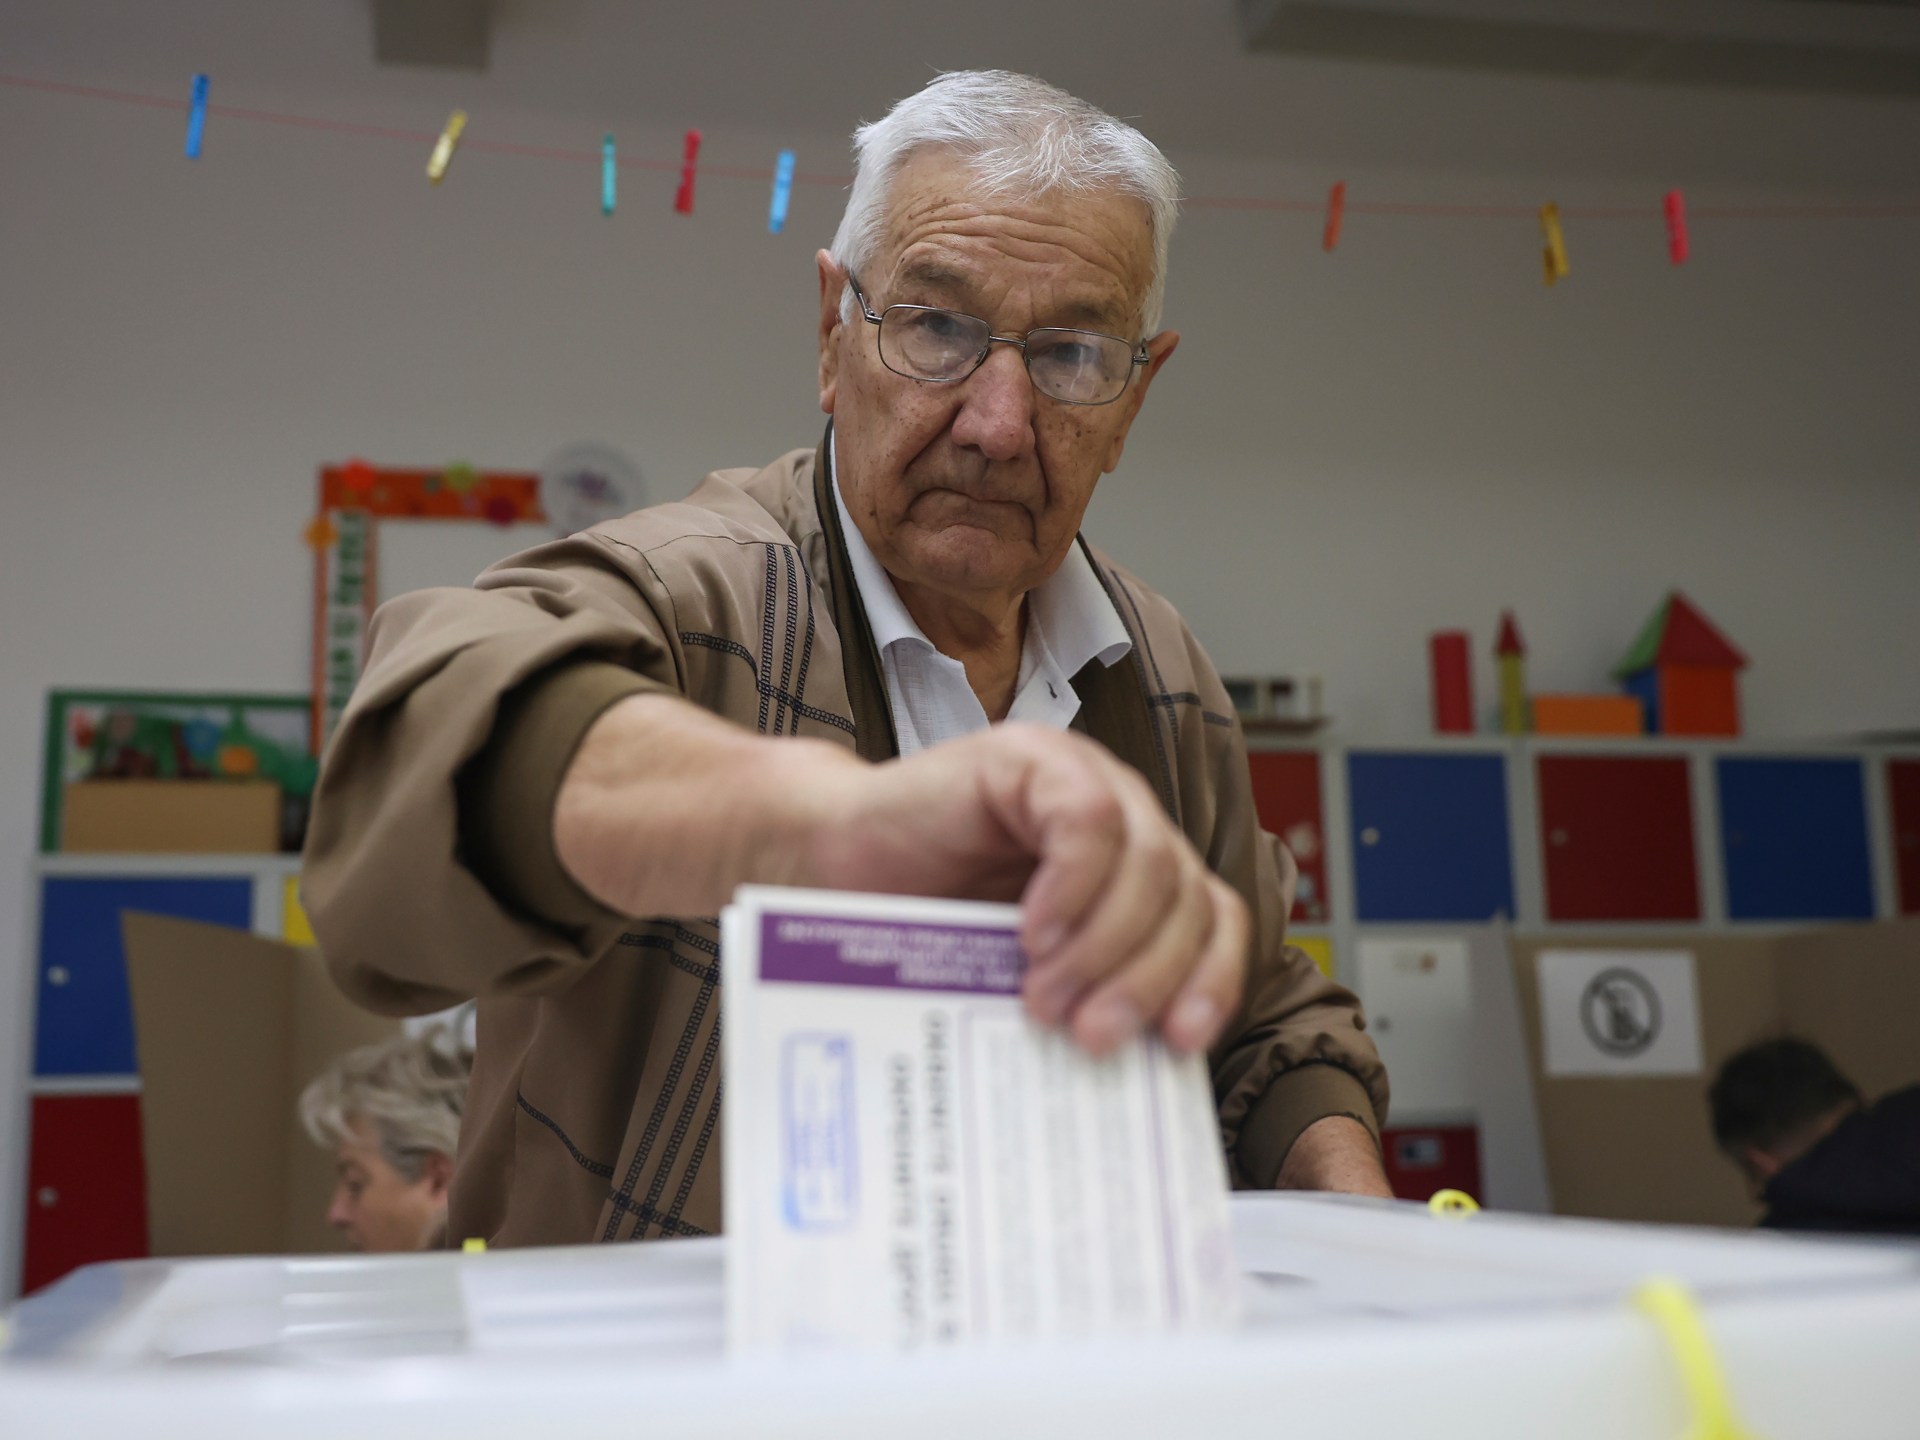 Bosnia votes in general elections amid growing ethnic divide